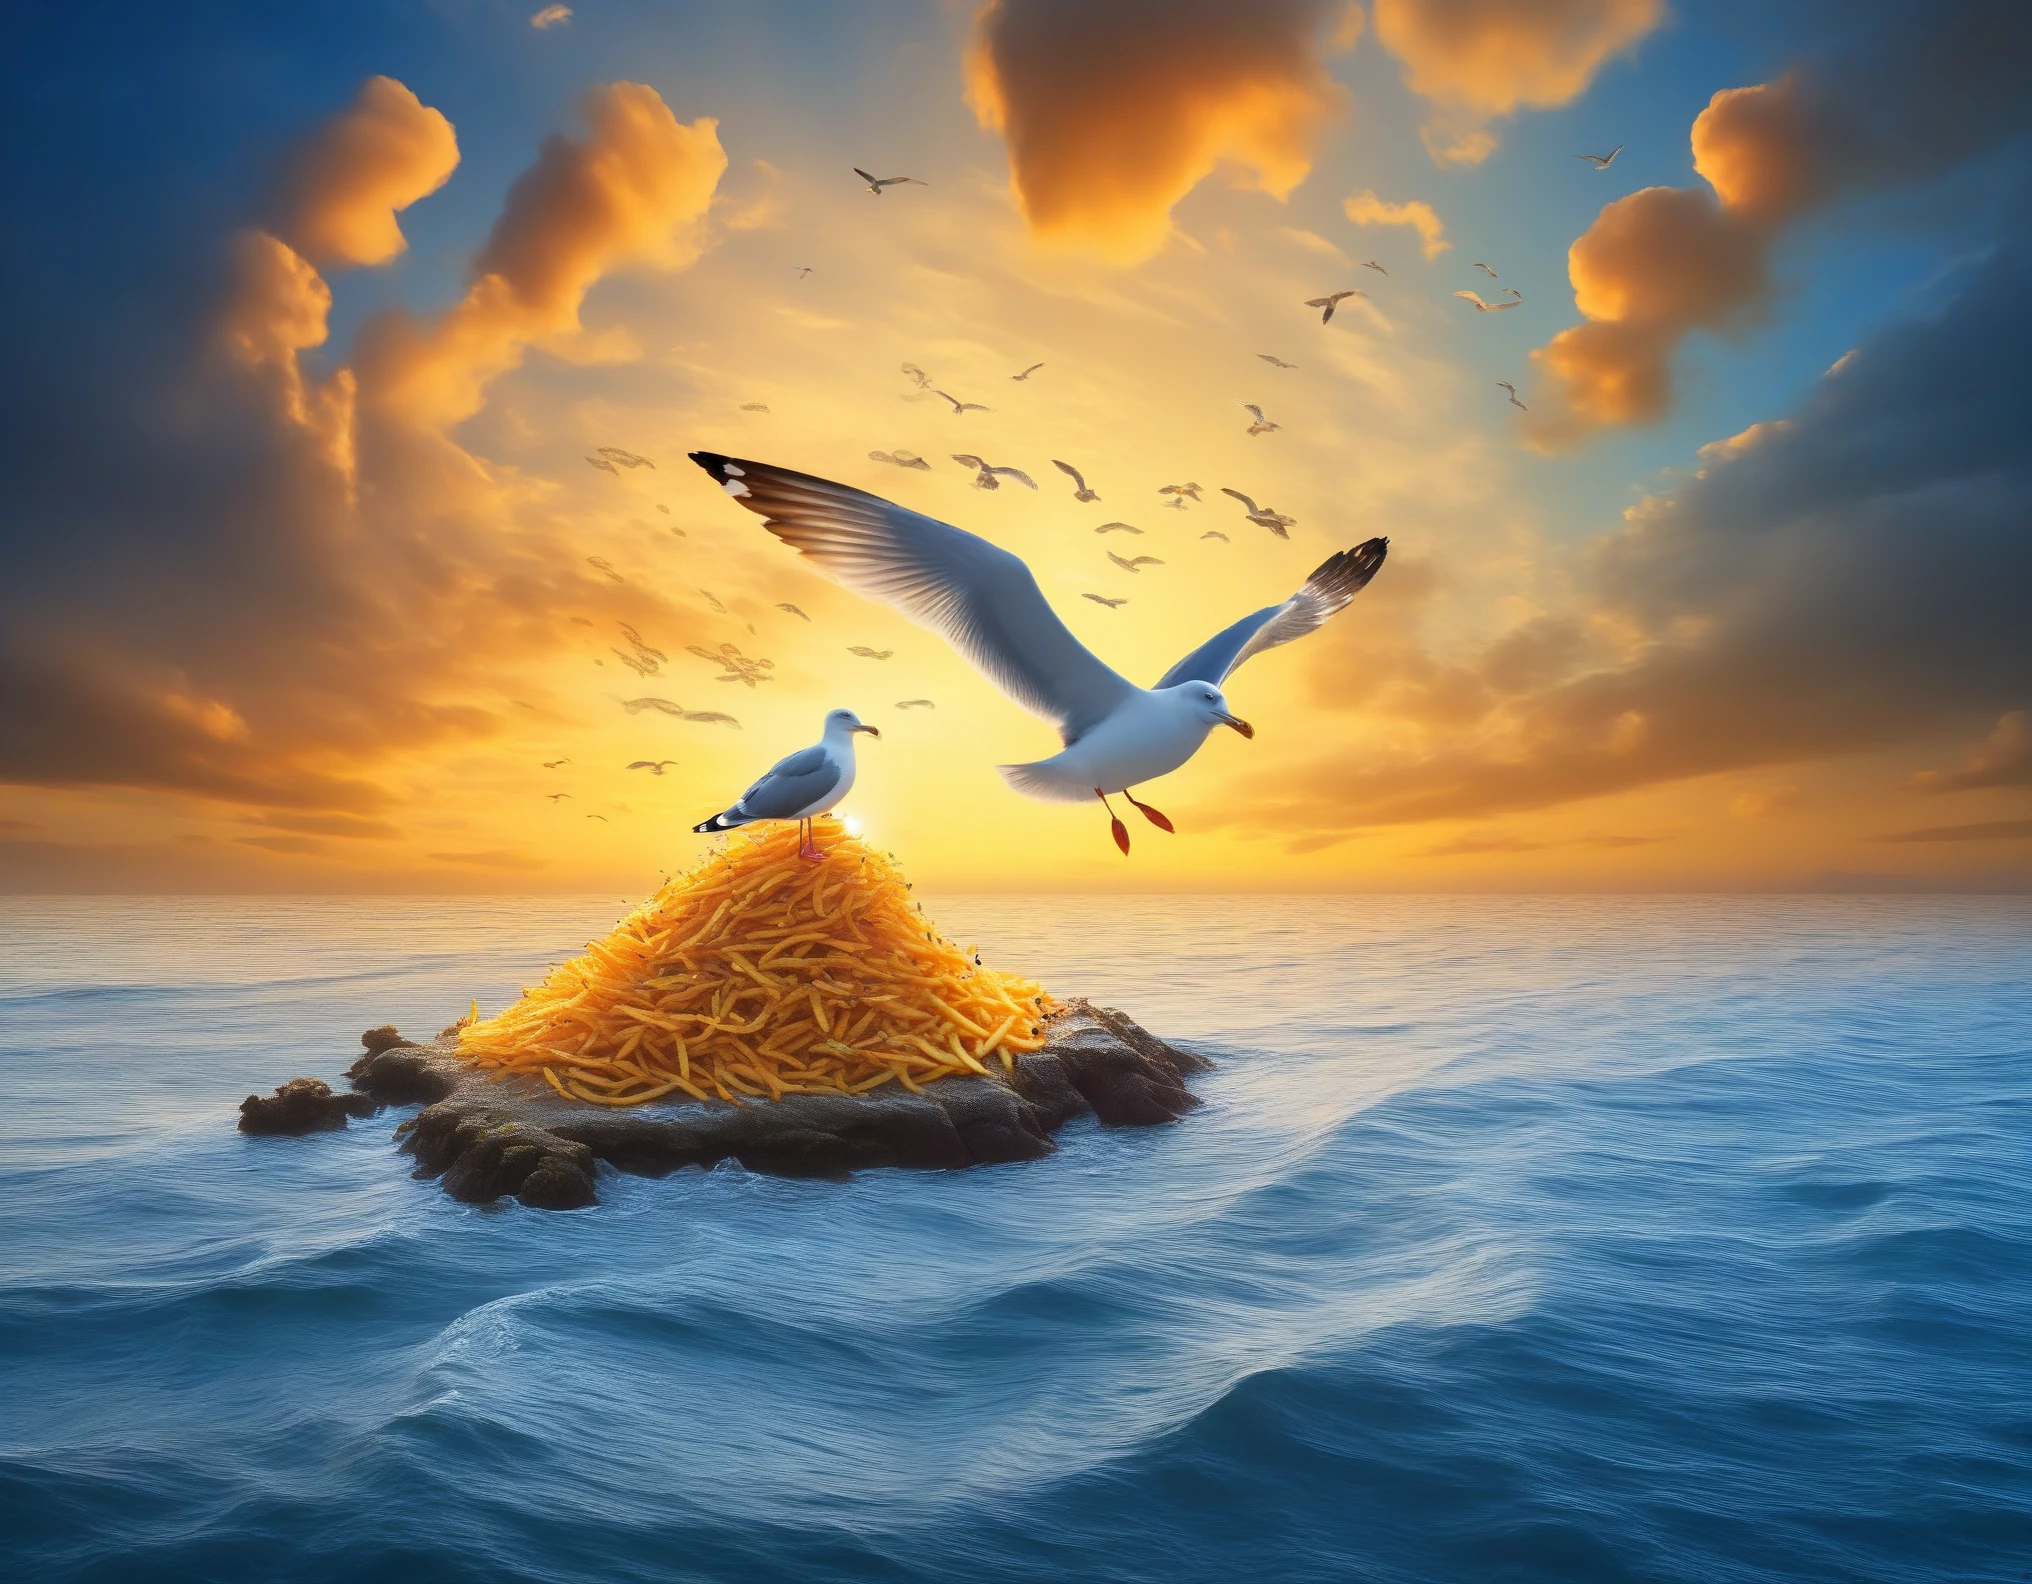 Concept art, islets made of small fish, seagull and fries, (seagull with small fish in its mouth), sunset, swirling clouds, mysterious sky, illustrated in oil, high contrast,